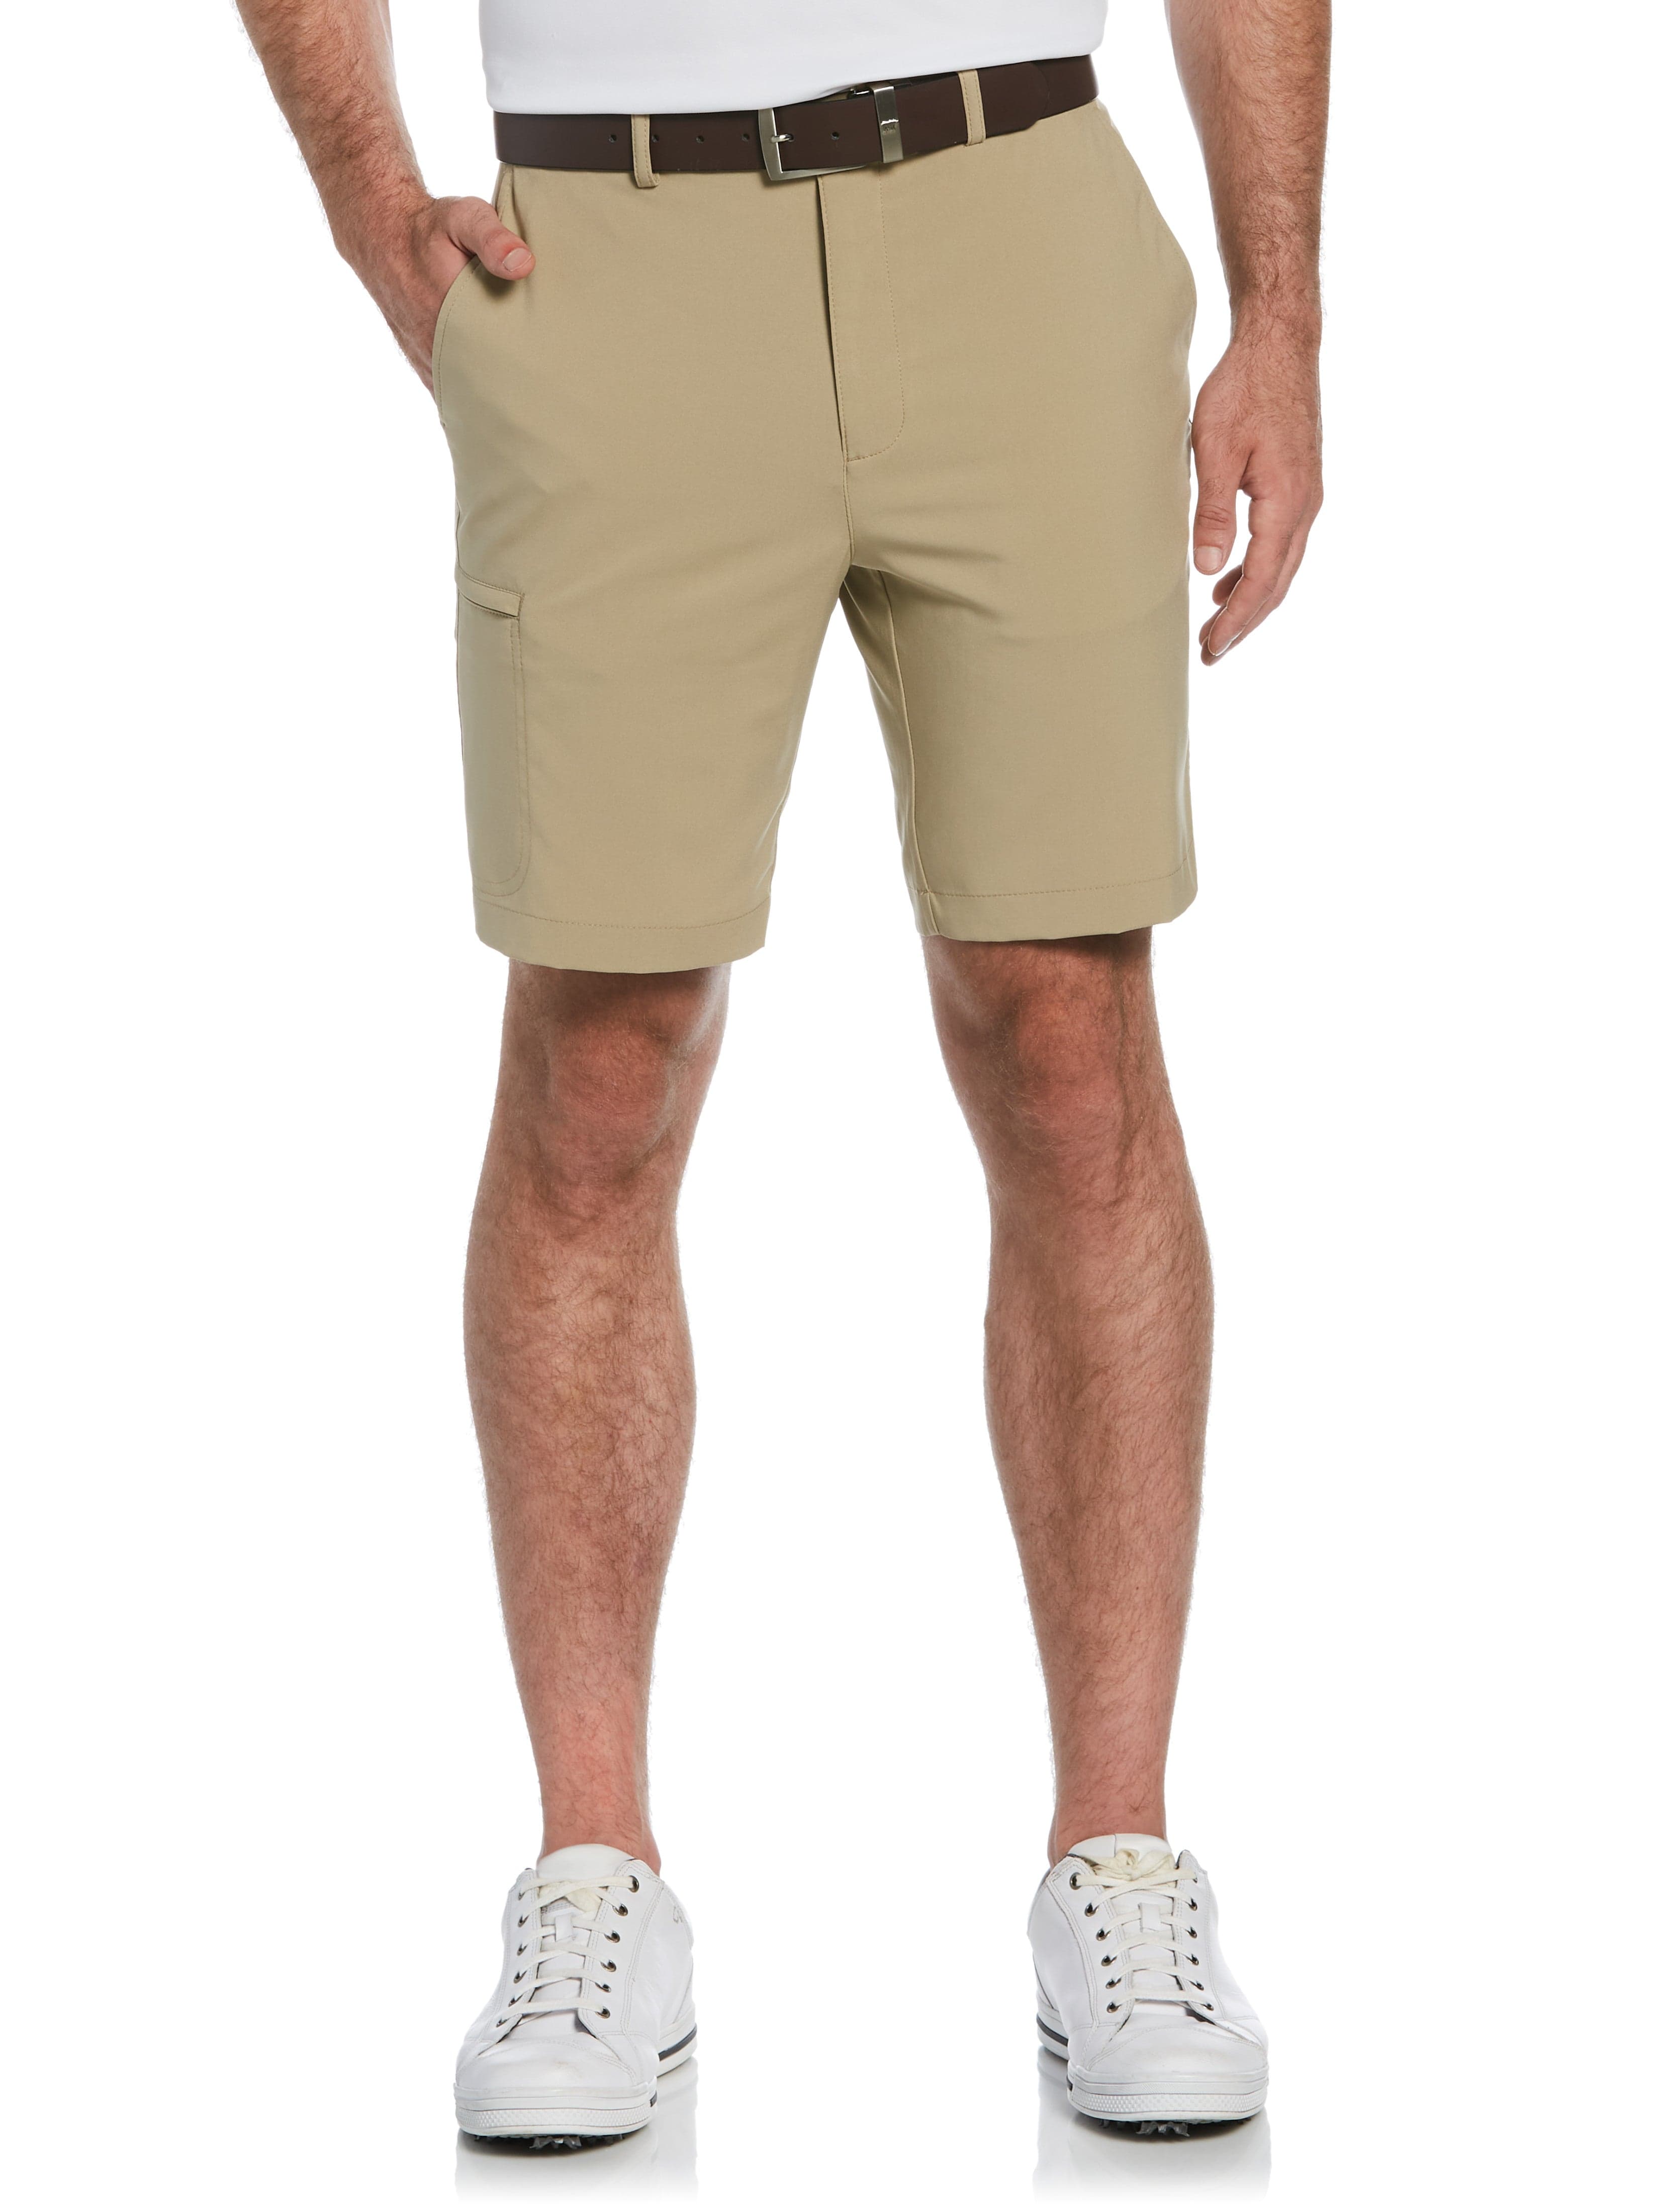 Jack Nicklaus Mens Flat Front Solid Golf Shorts w/ Cargo Pocket, Size 34, Chinchilla Beige, 100% Polyester | Golf Apparel Shop